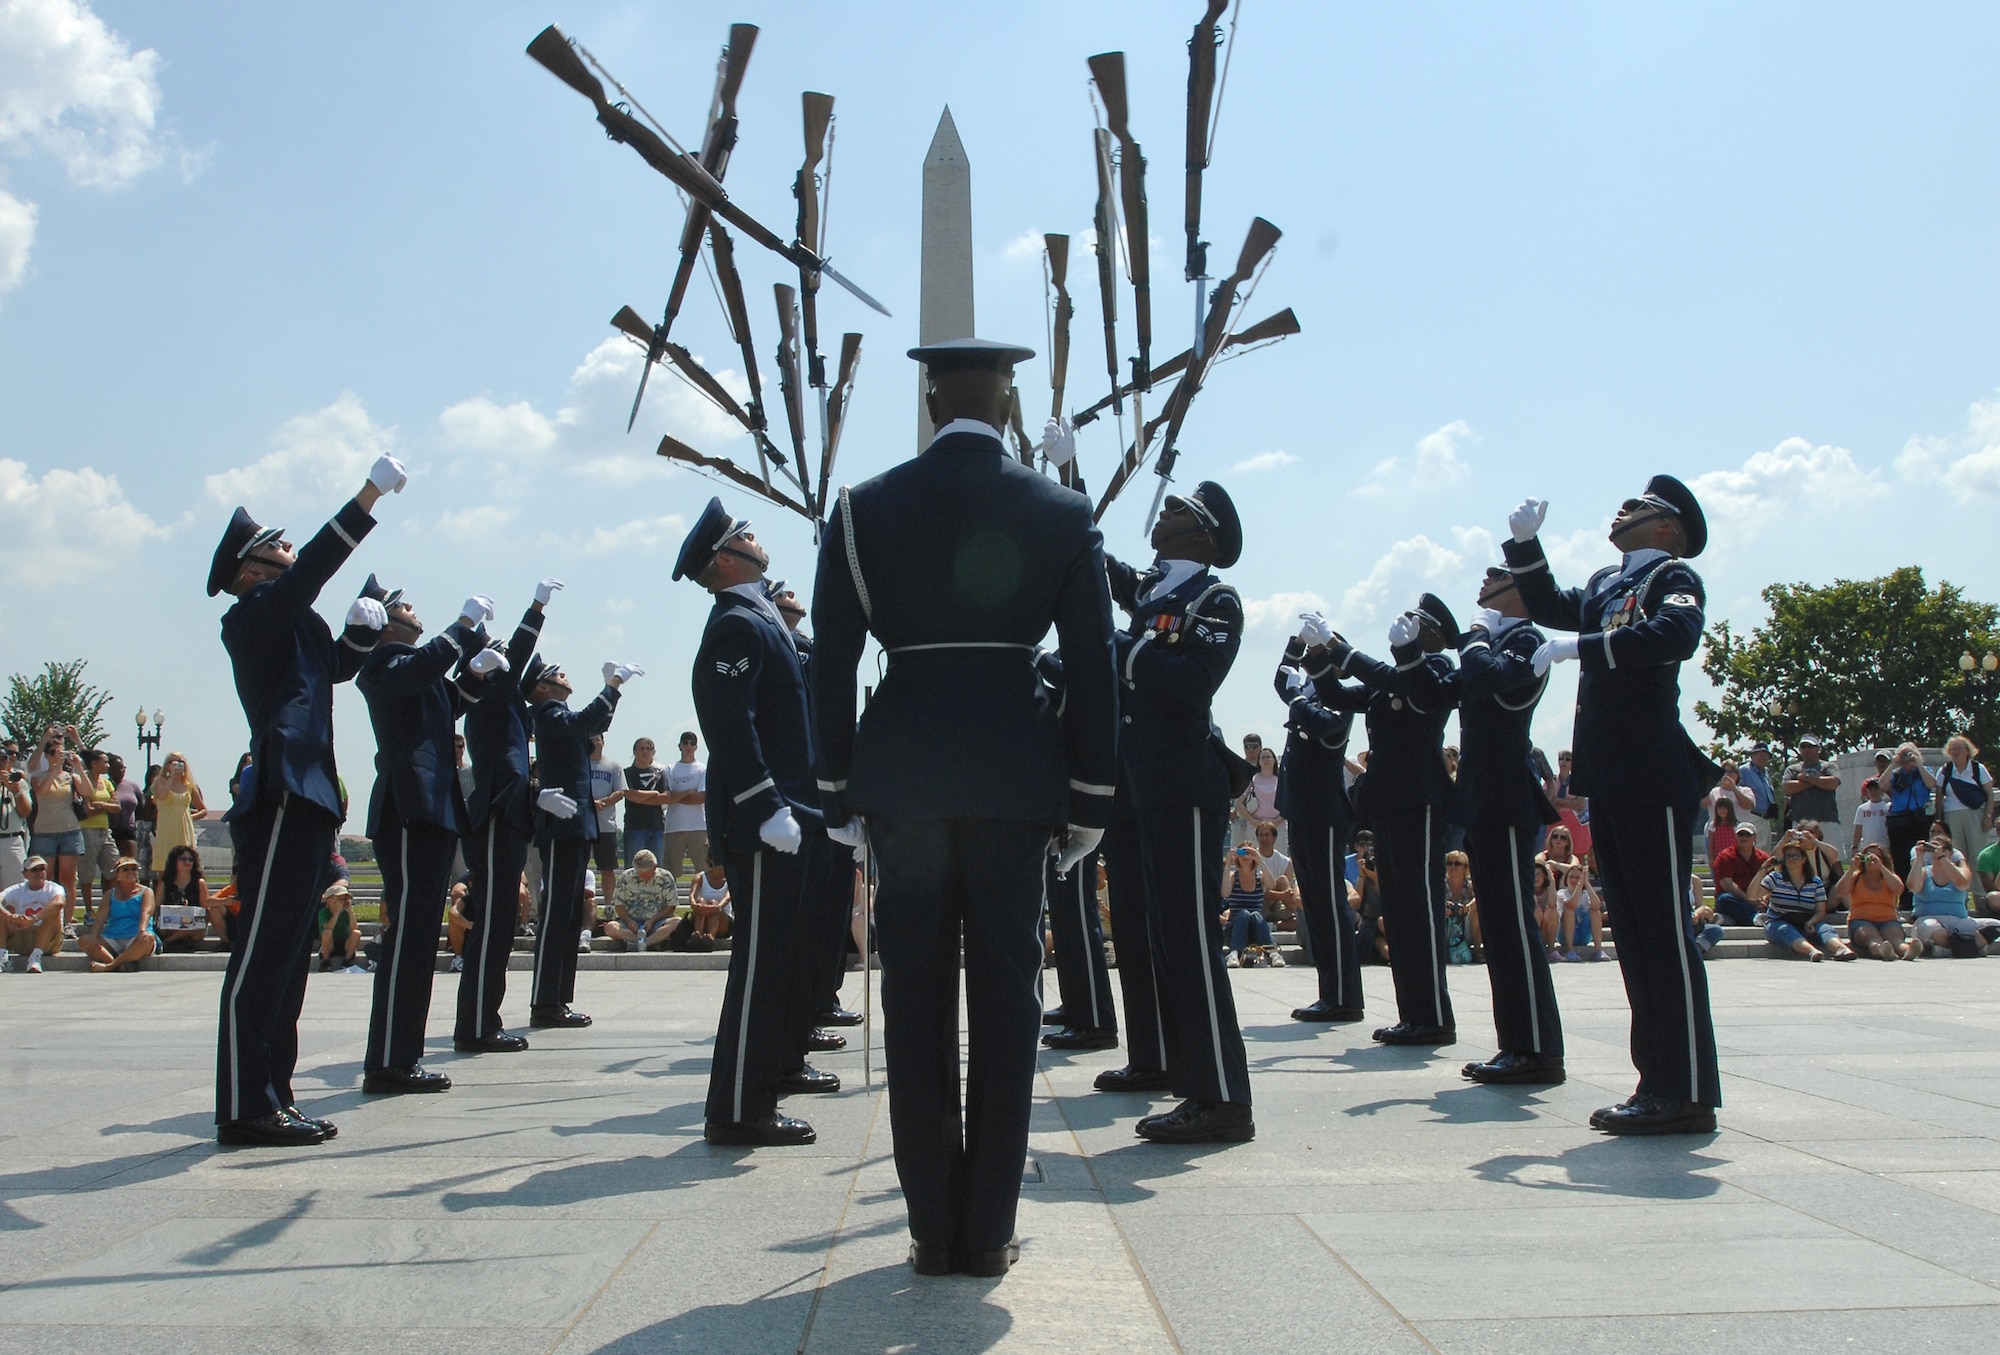 The U.S. Honor Guard Drill Team performs as part of the team's Summer Drill Series July 11 at the World War II Memorial in Washington. The team will perform around the National Capitol Region until July 29. For more information about the 2008 performances, logon to www.honorguard.af.mil/drillteam/. (U.S Air Force photo by Senior Airman Alexandre Montes)